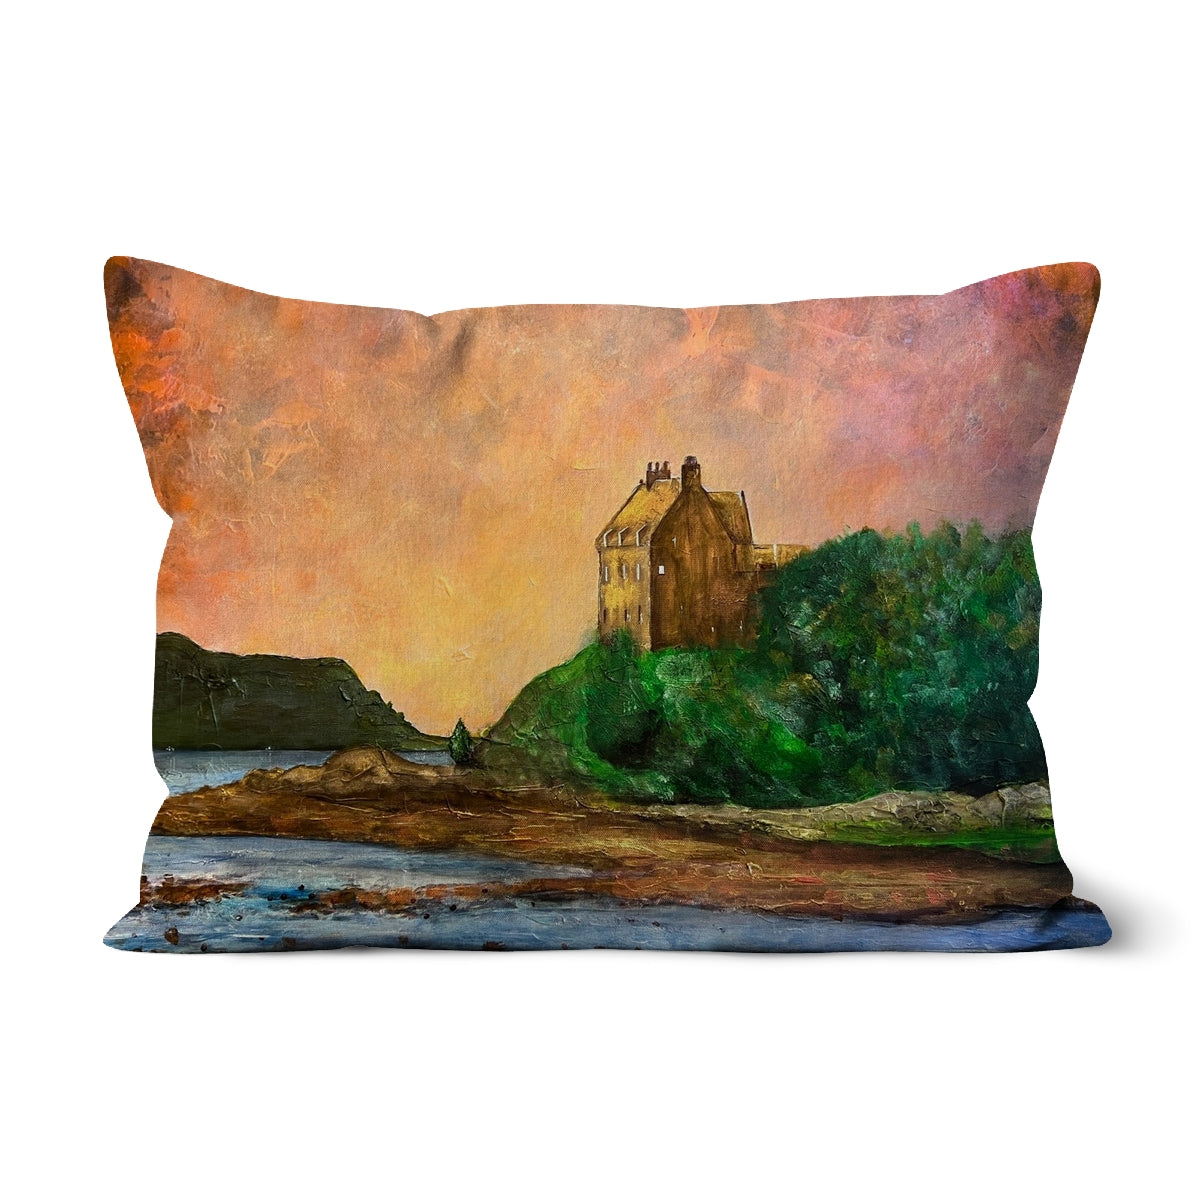 Duntrune Castle Art Gifts Cushion-Cushions-Historic & Iconic Scotland Art Gallery-Linen-19"x13"-Paintings, Prints, Homeware, Art Gifts From Scotland By Scottish Artist Kevin Hunter